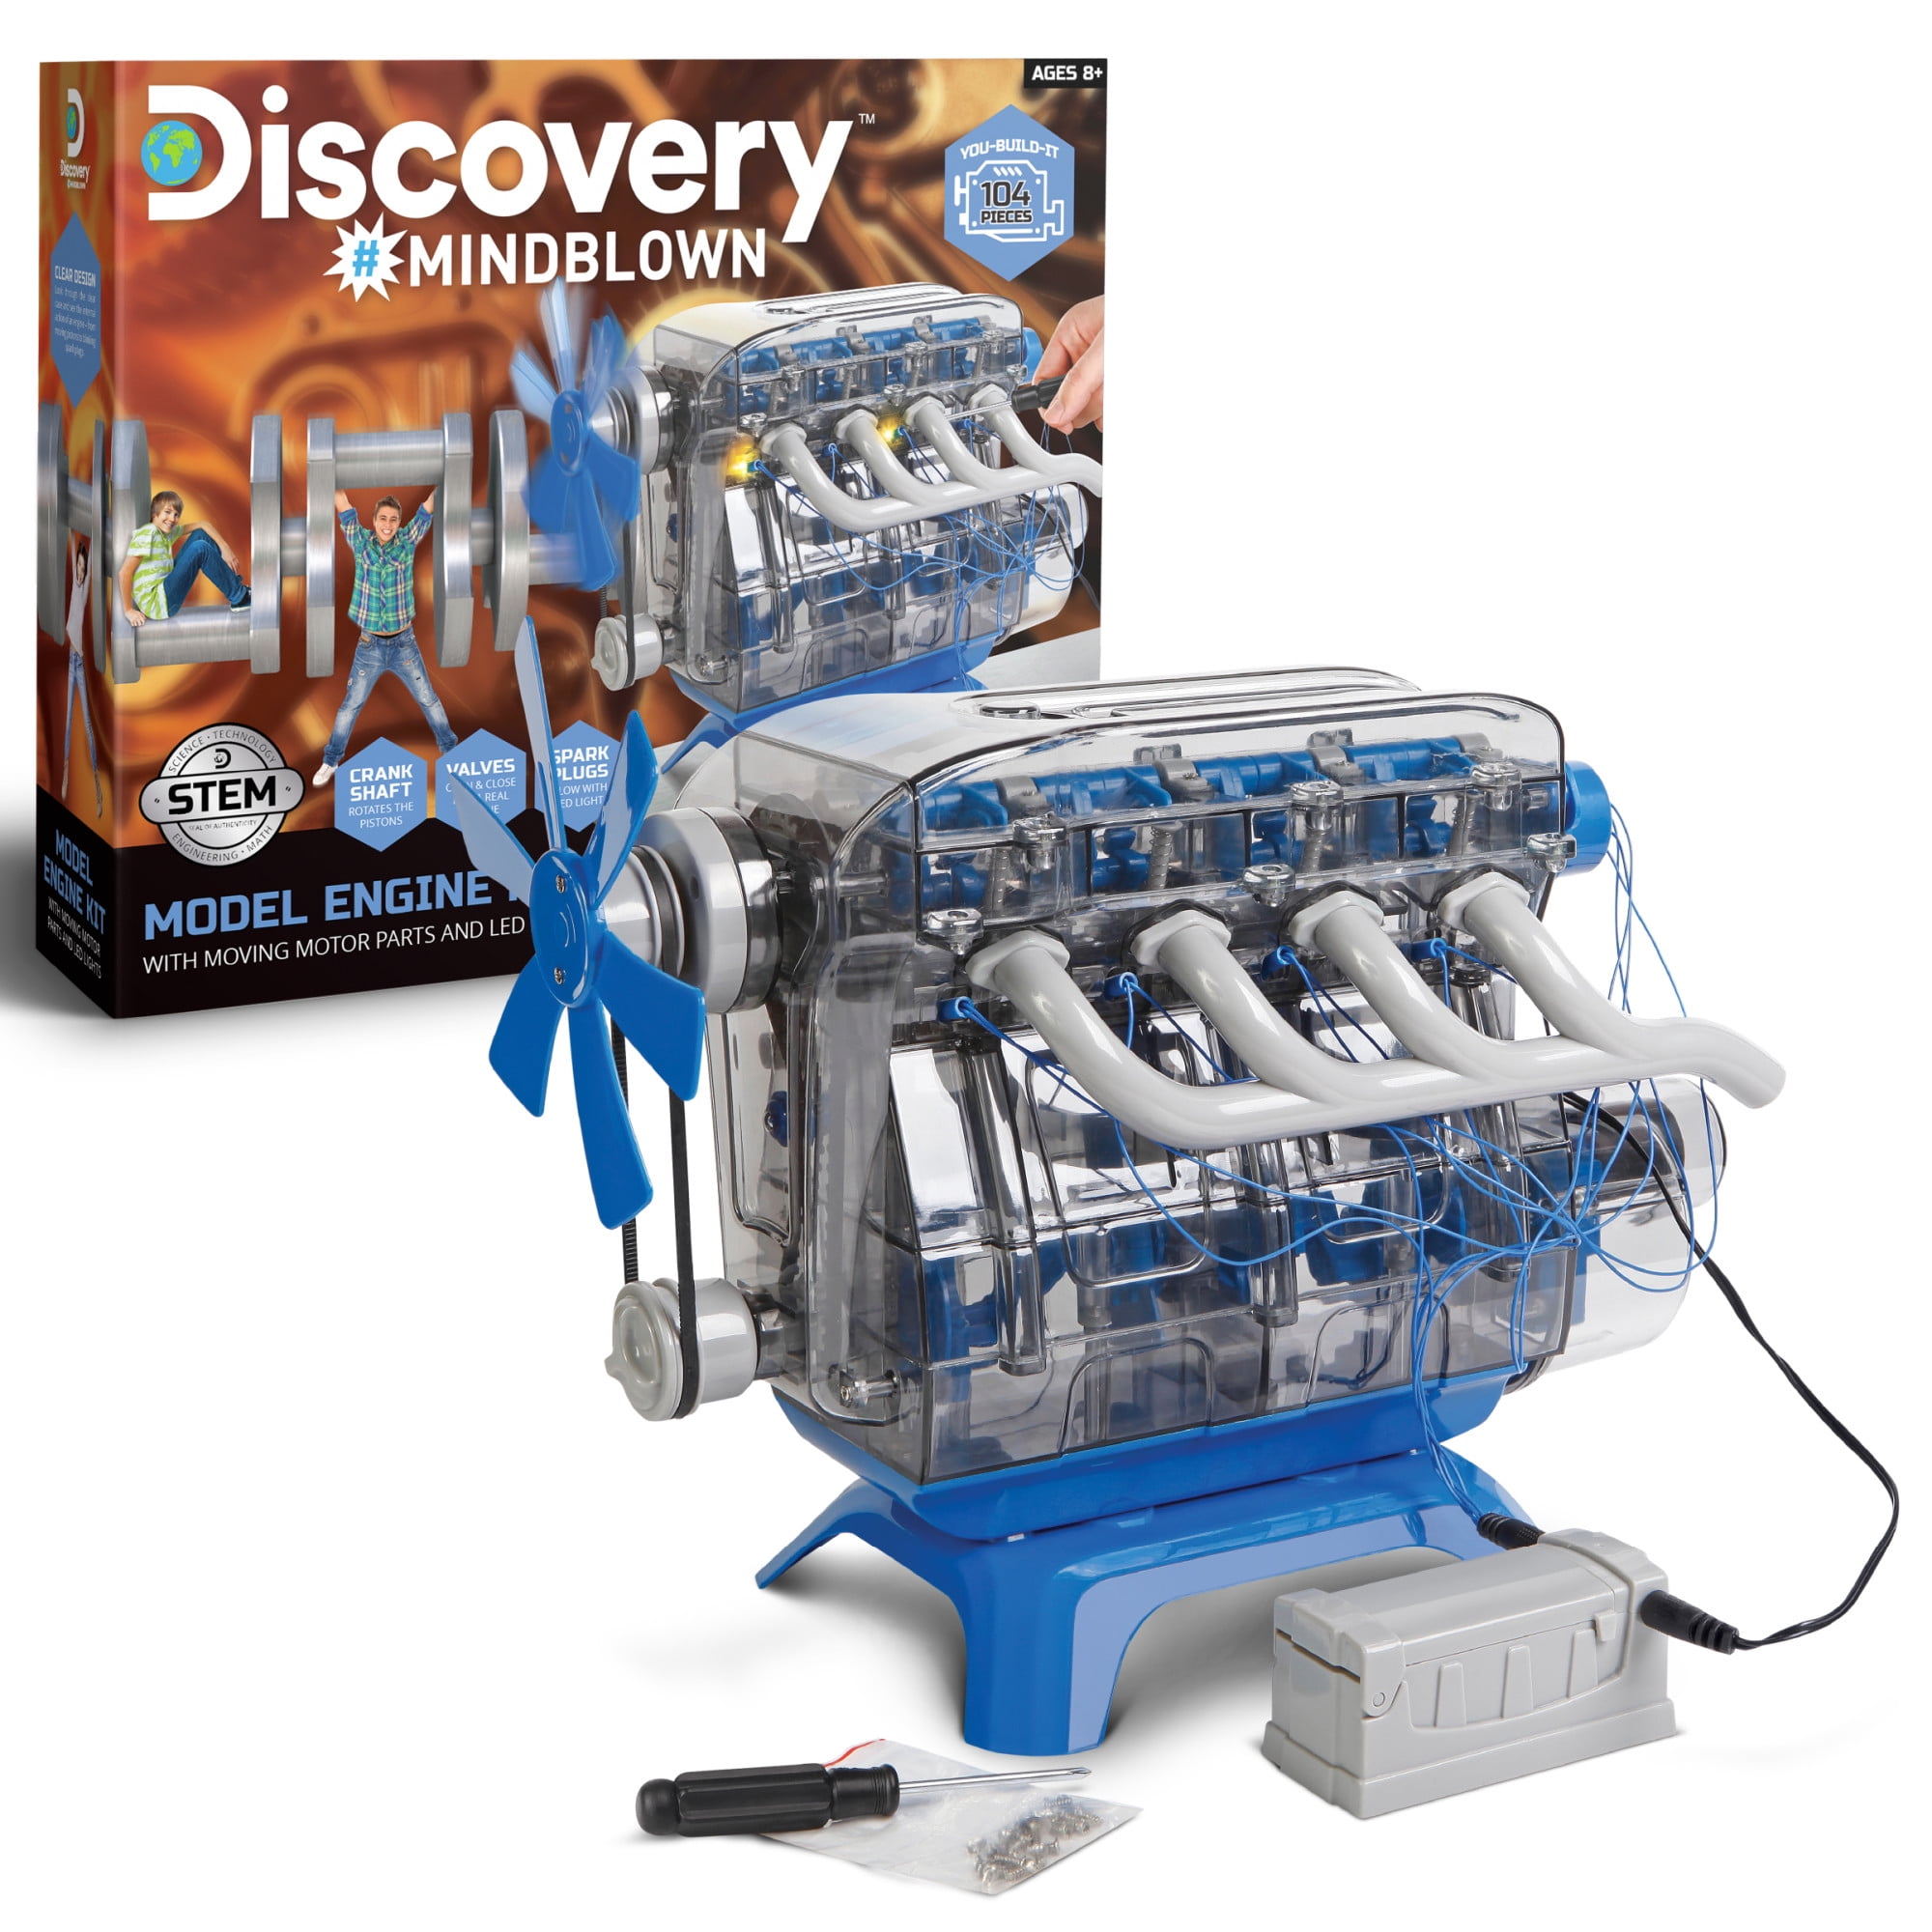 Discovery #Mindblown Model Engine Kit, with Moving Motor Parts And LED Lights